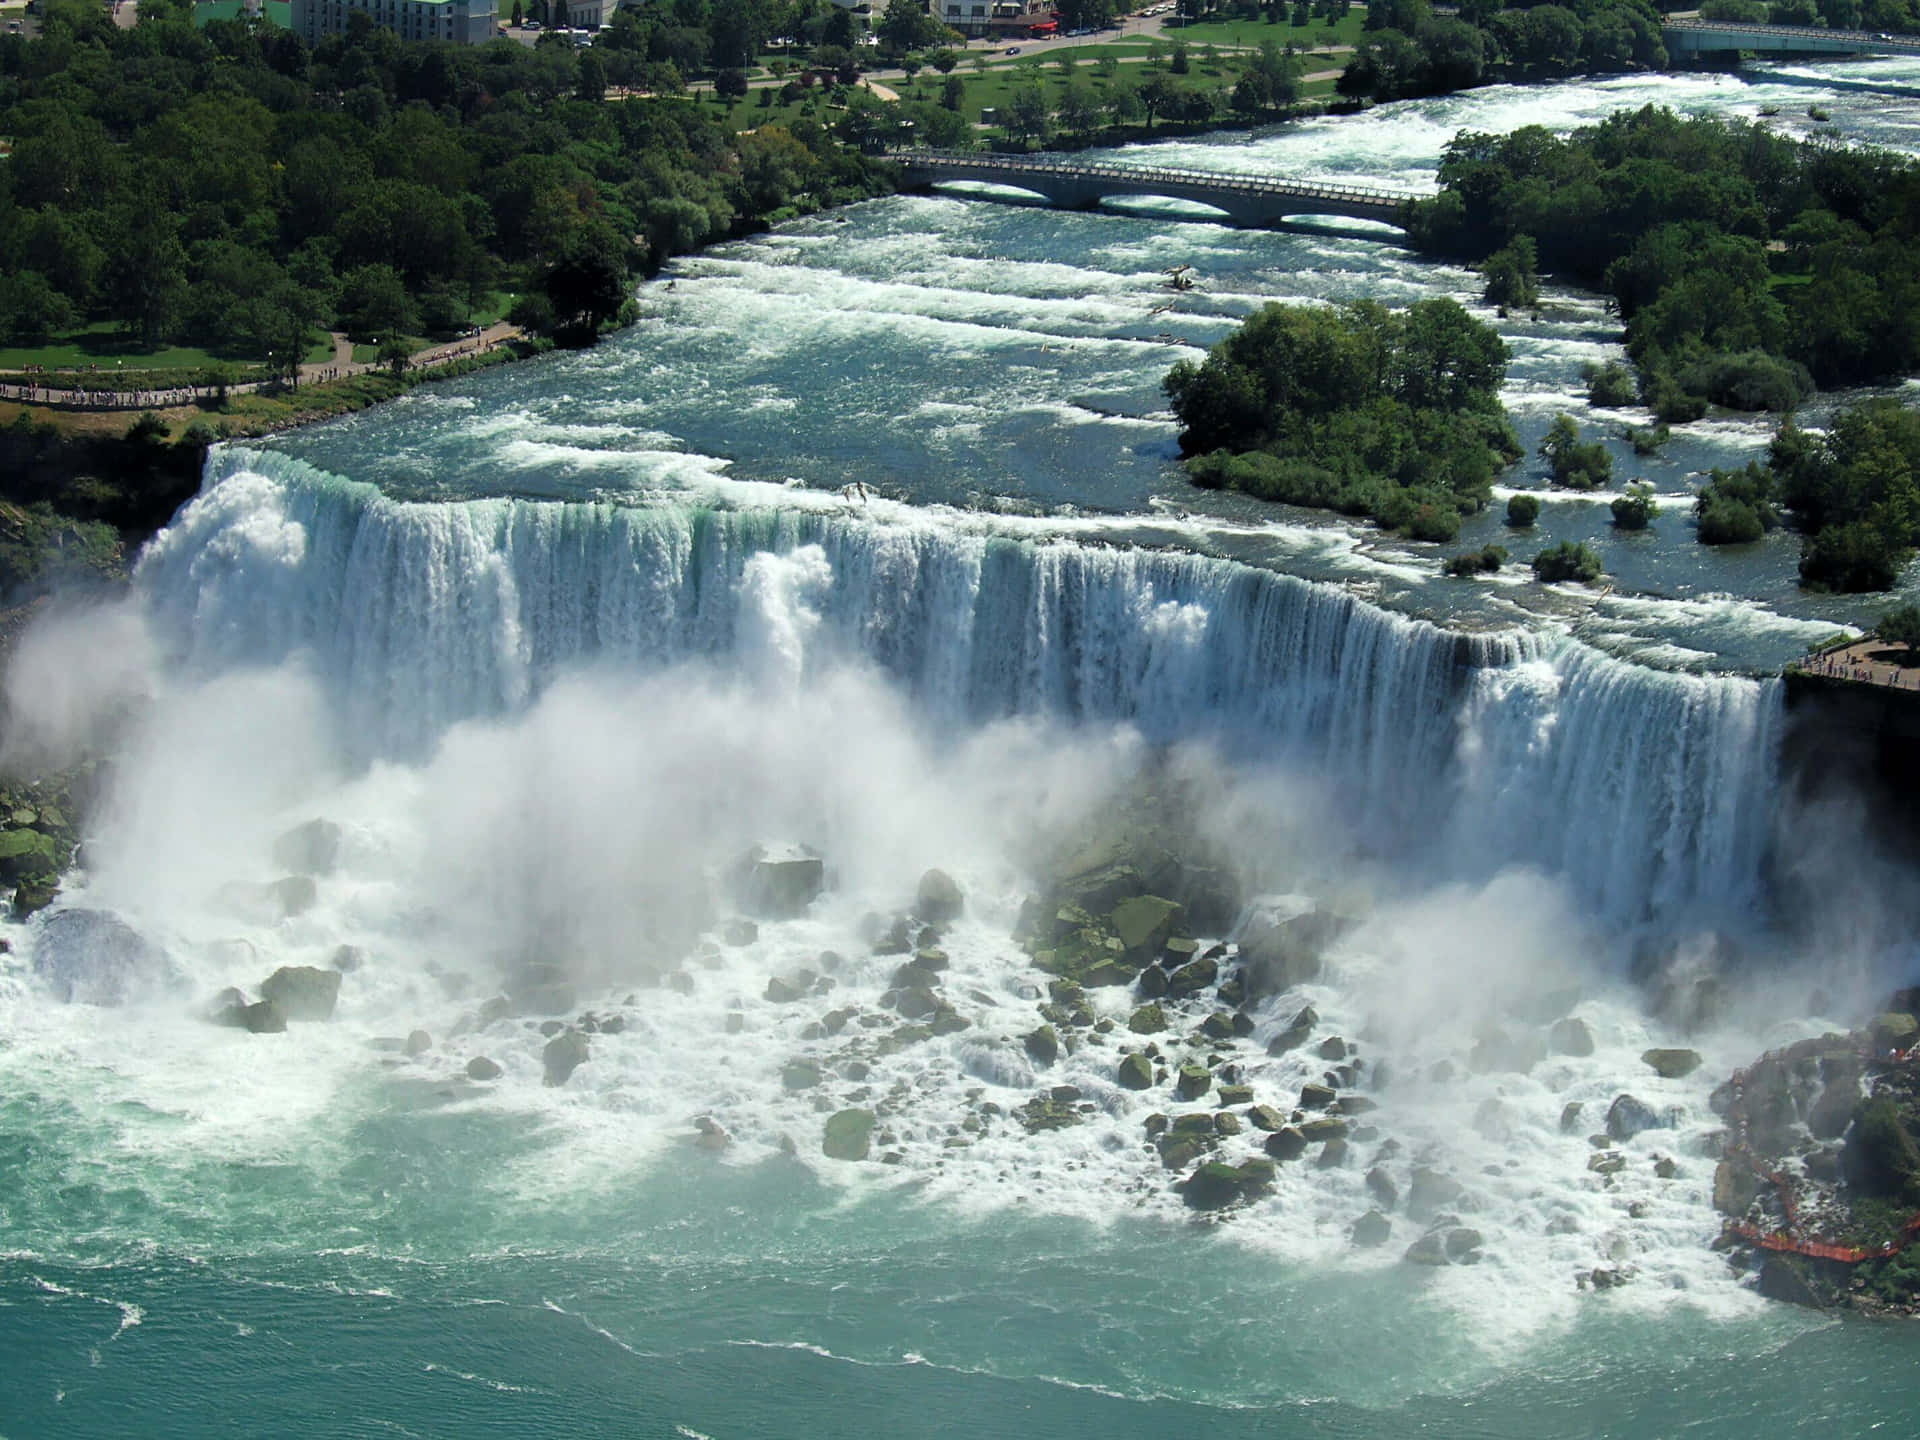 Take a journey to the magnificent Niagara Falls